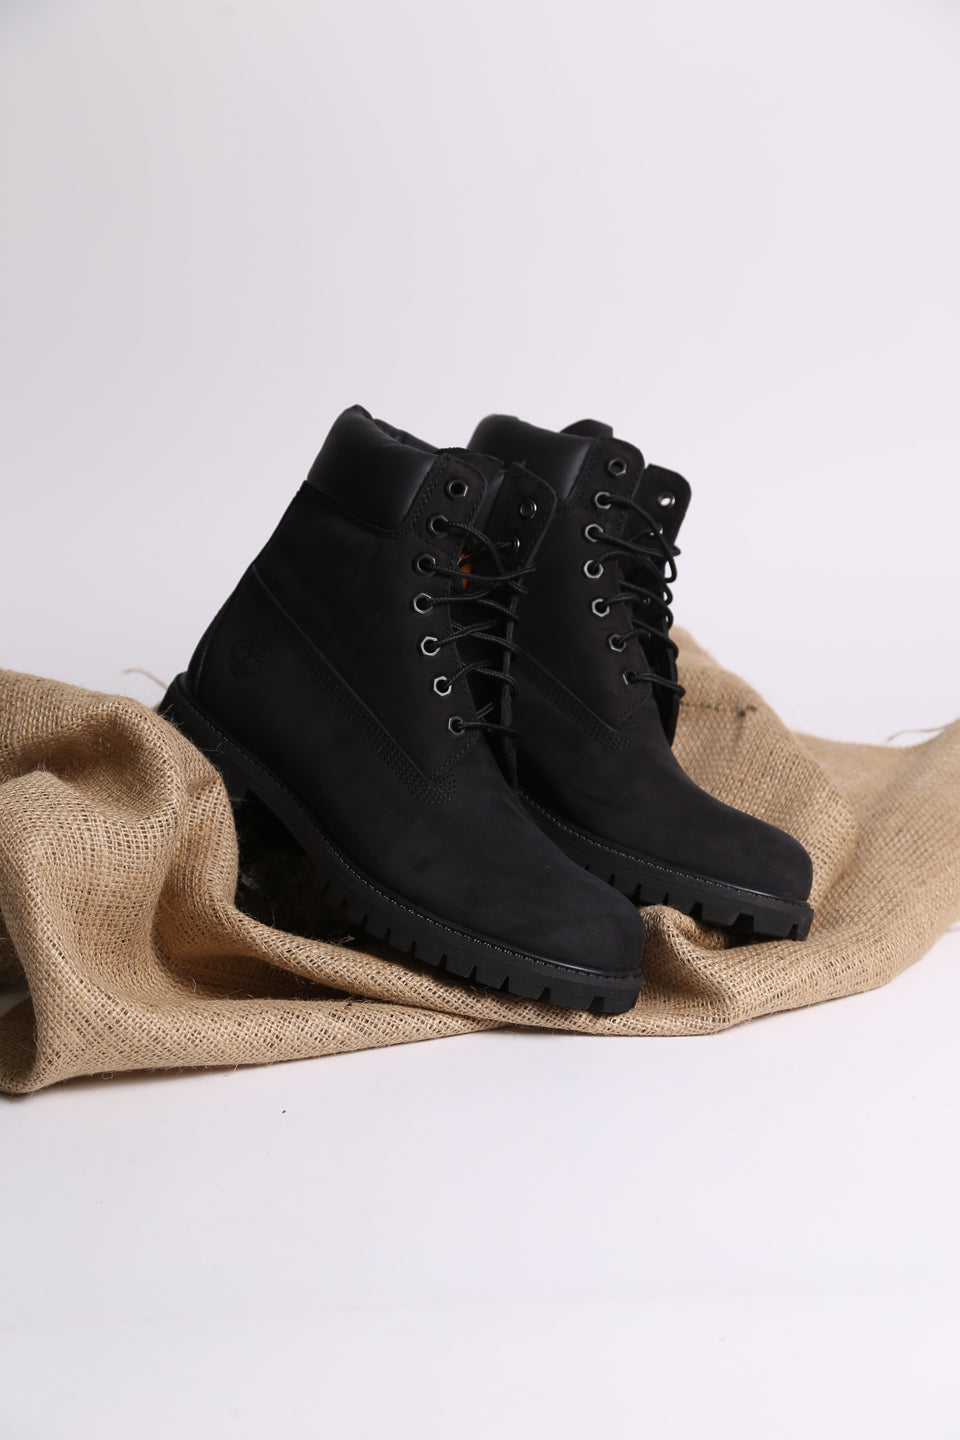 Timberland 6in PRM WP - Black